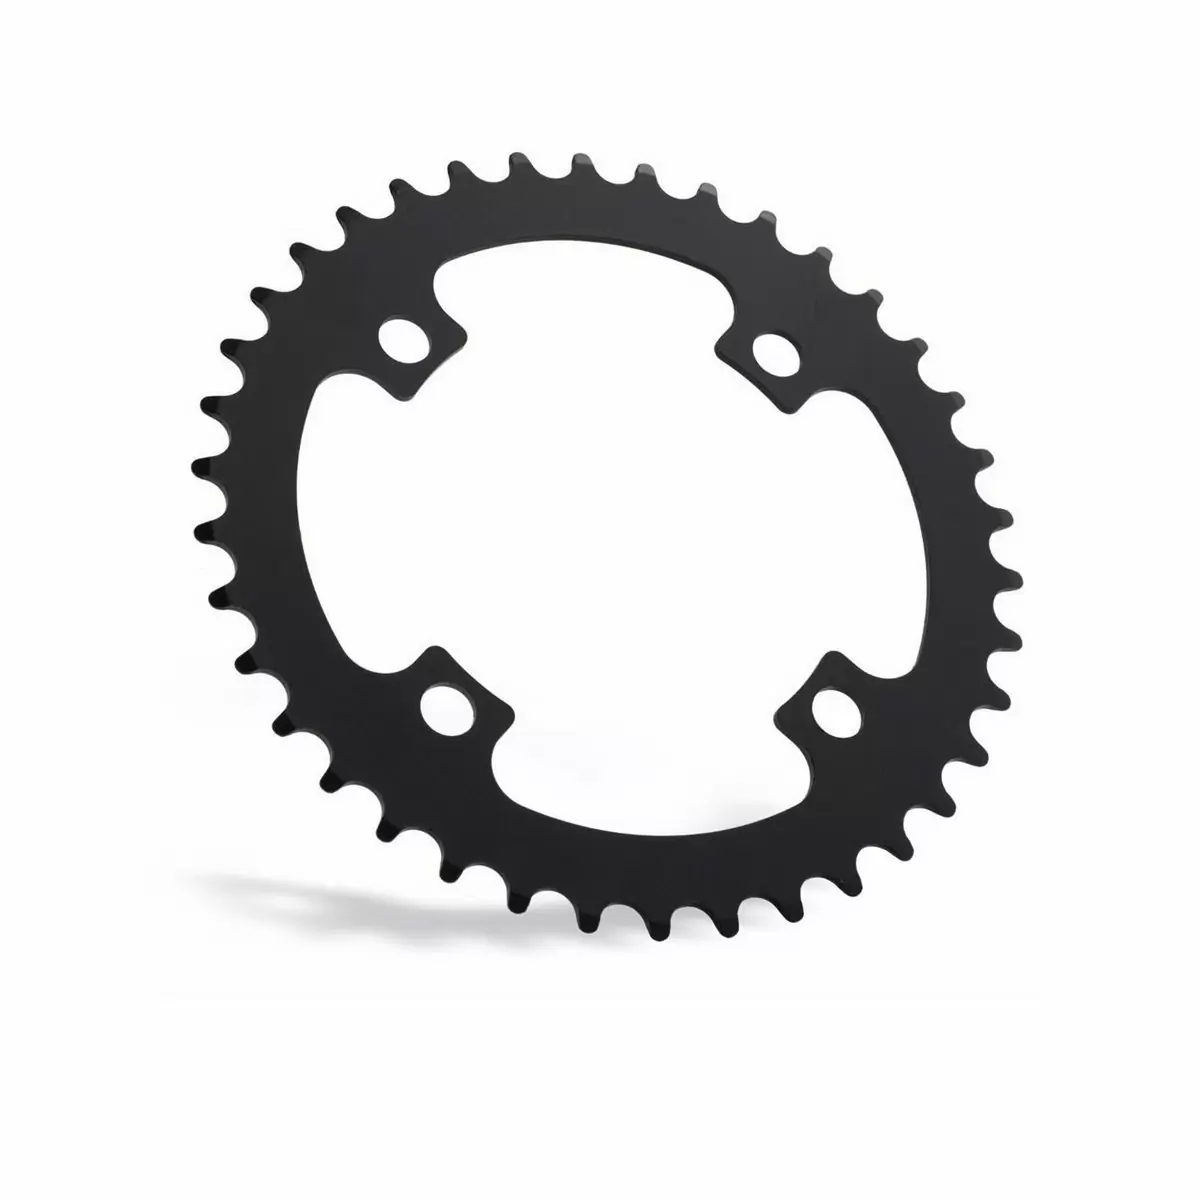 Ebike chainring 38t bcd 104mm - image